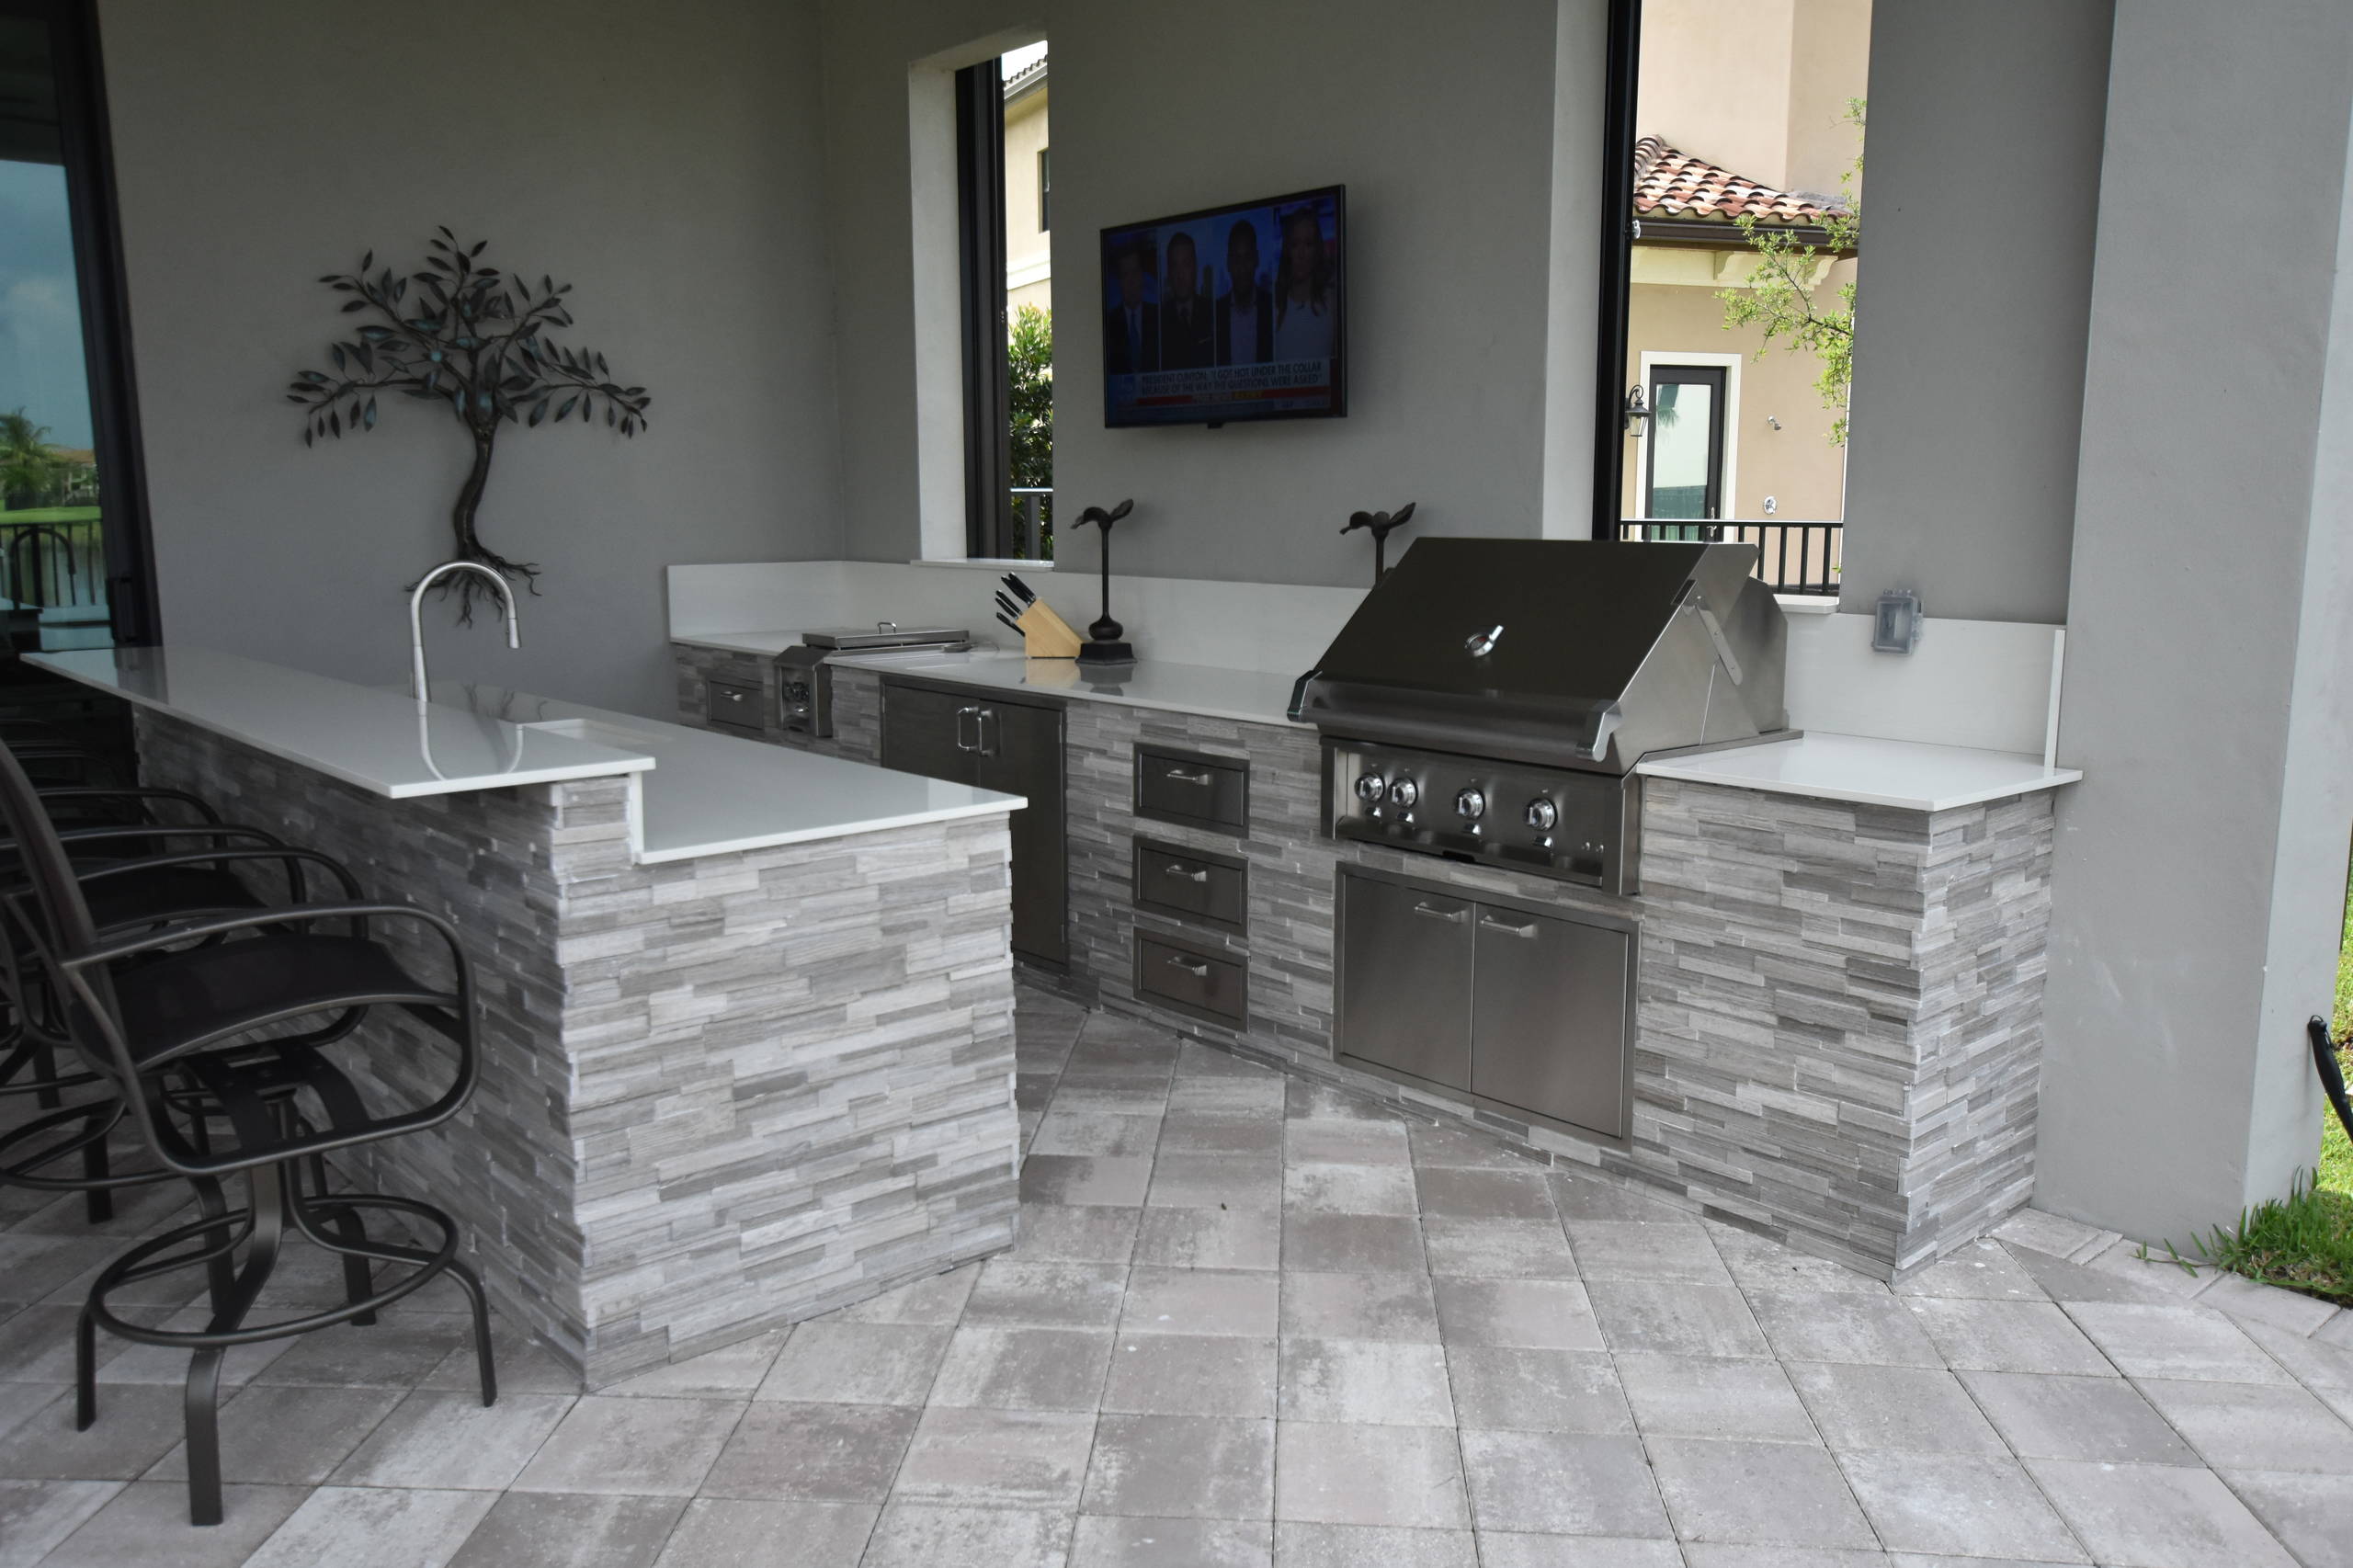 Inspiration for a contemporary backyard concrete paver patio kitchen remodel in Miami with a roof extension